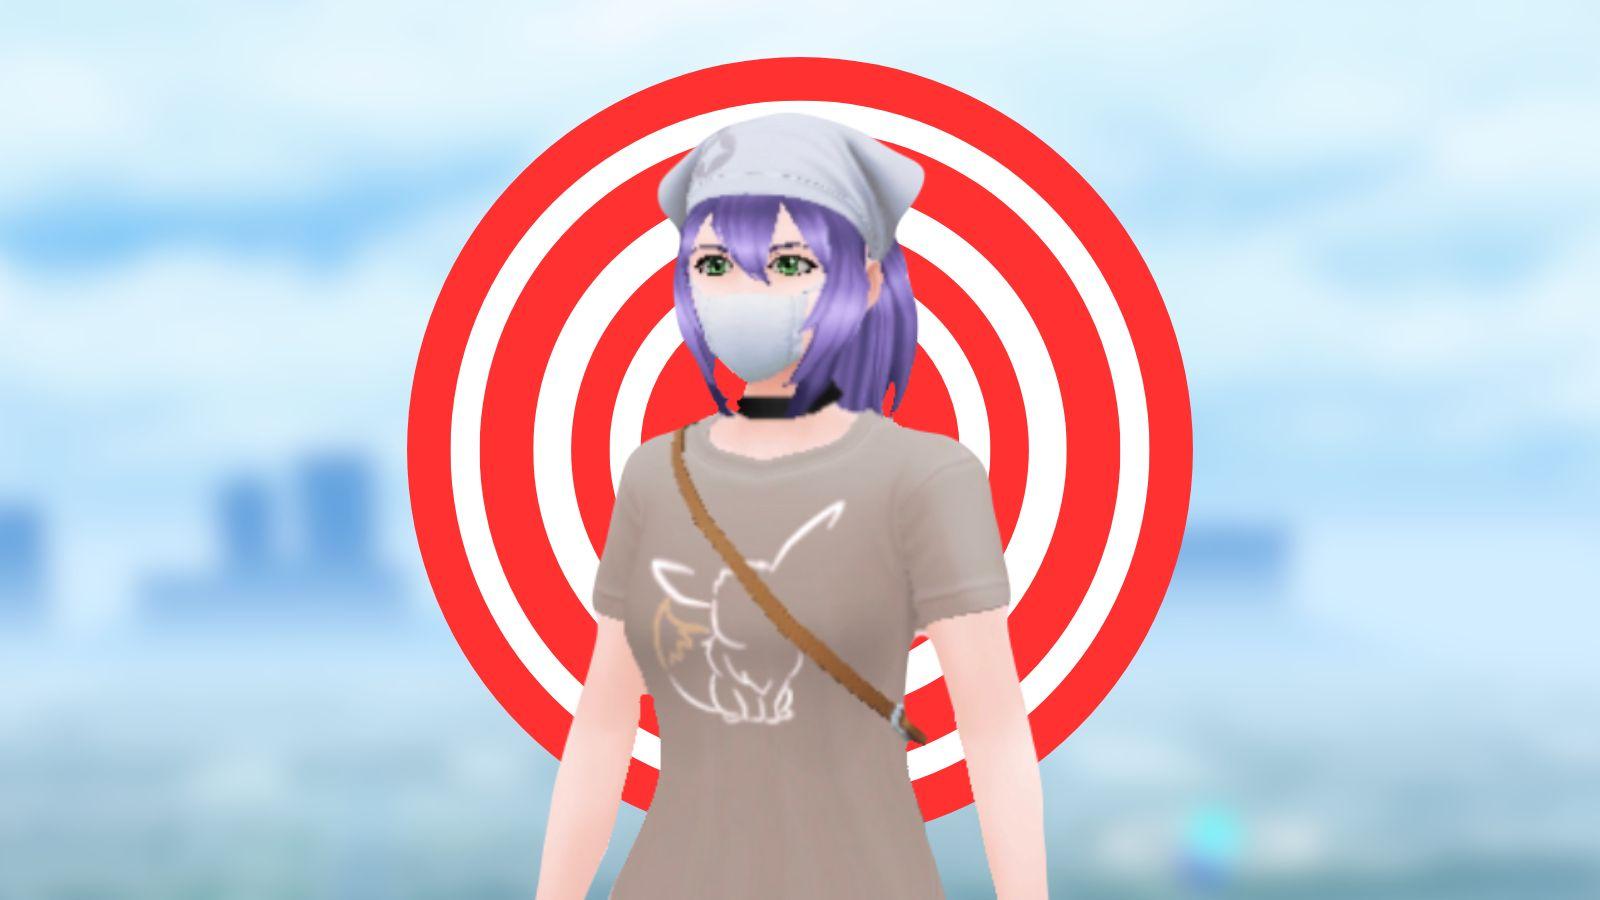 Pokemon Go avatar with target behind them and city.